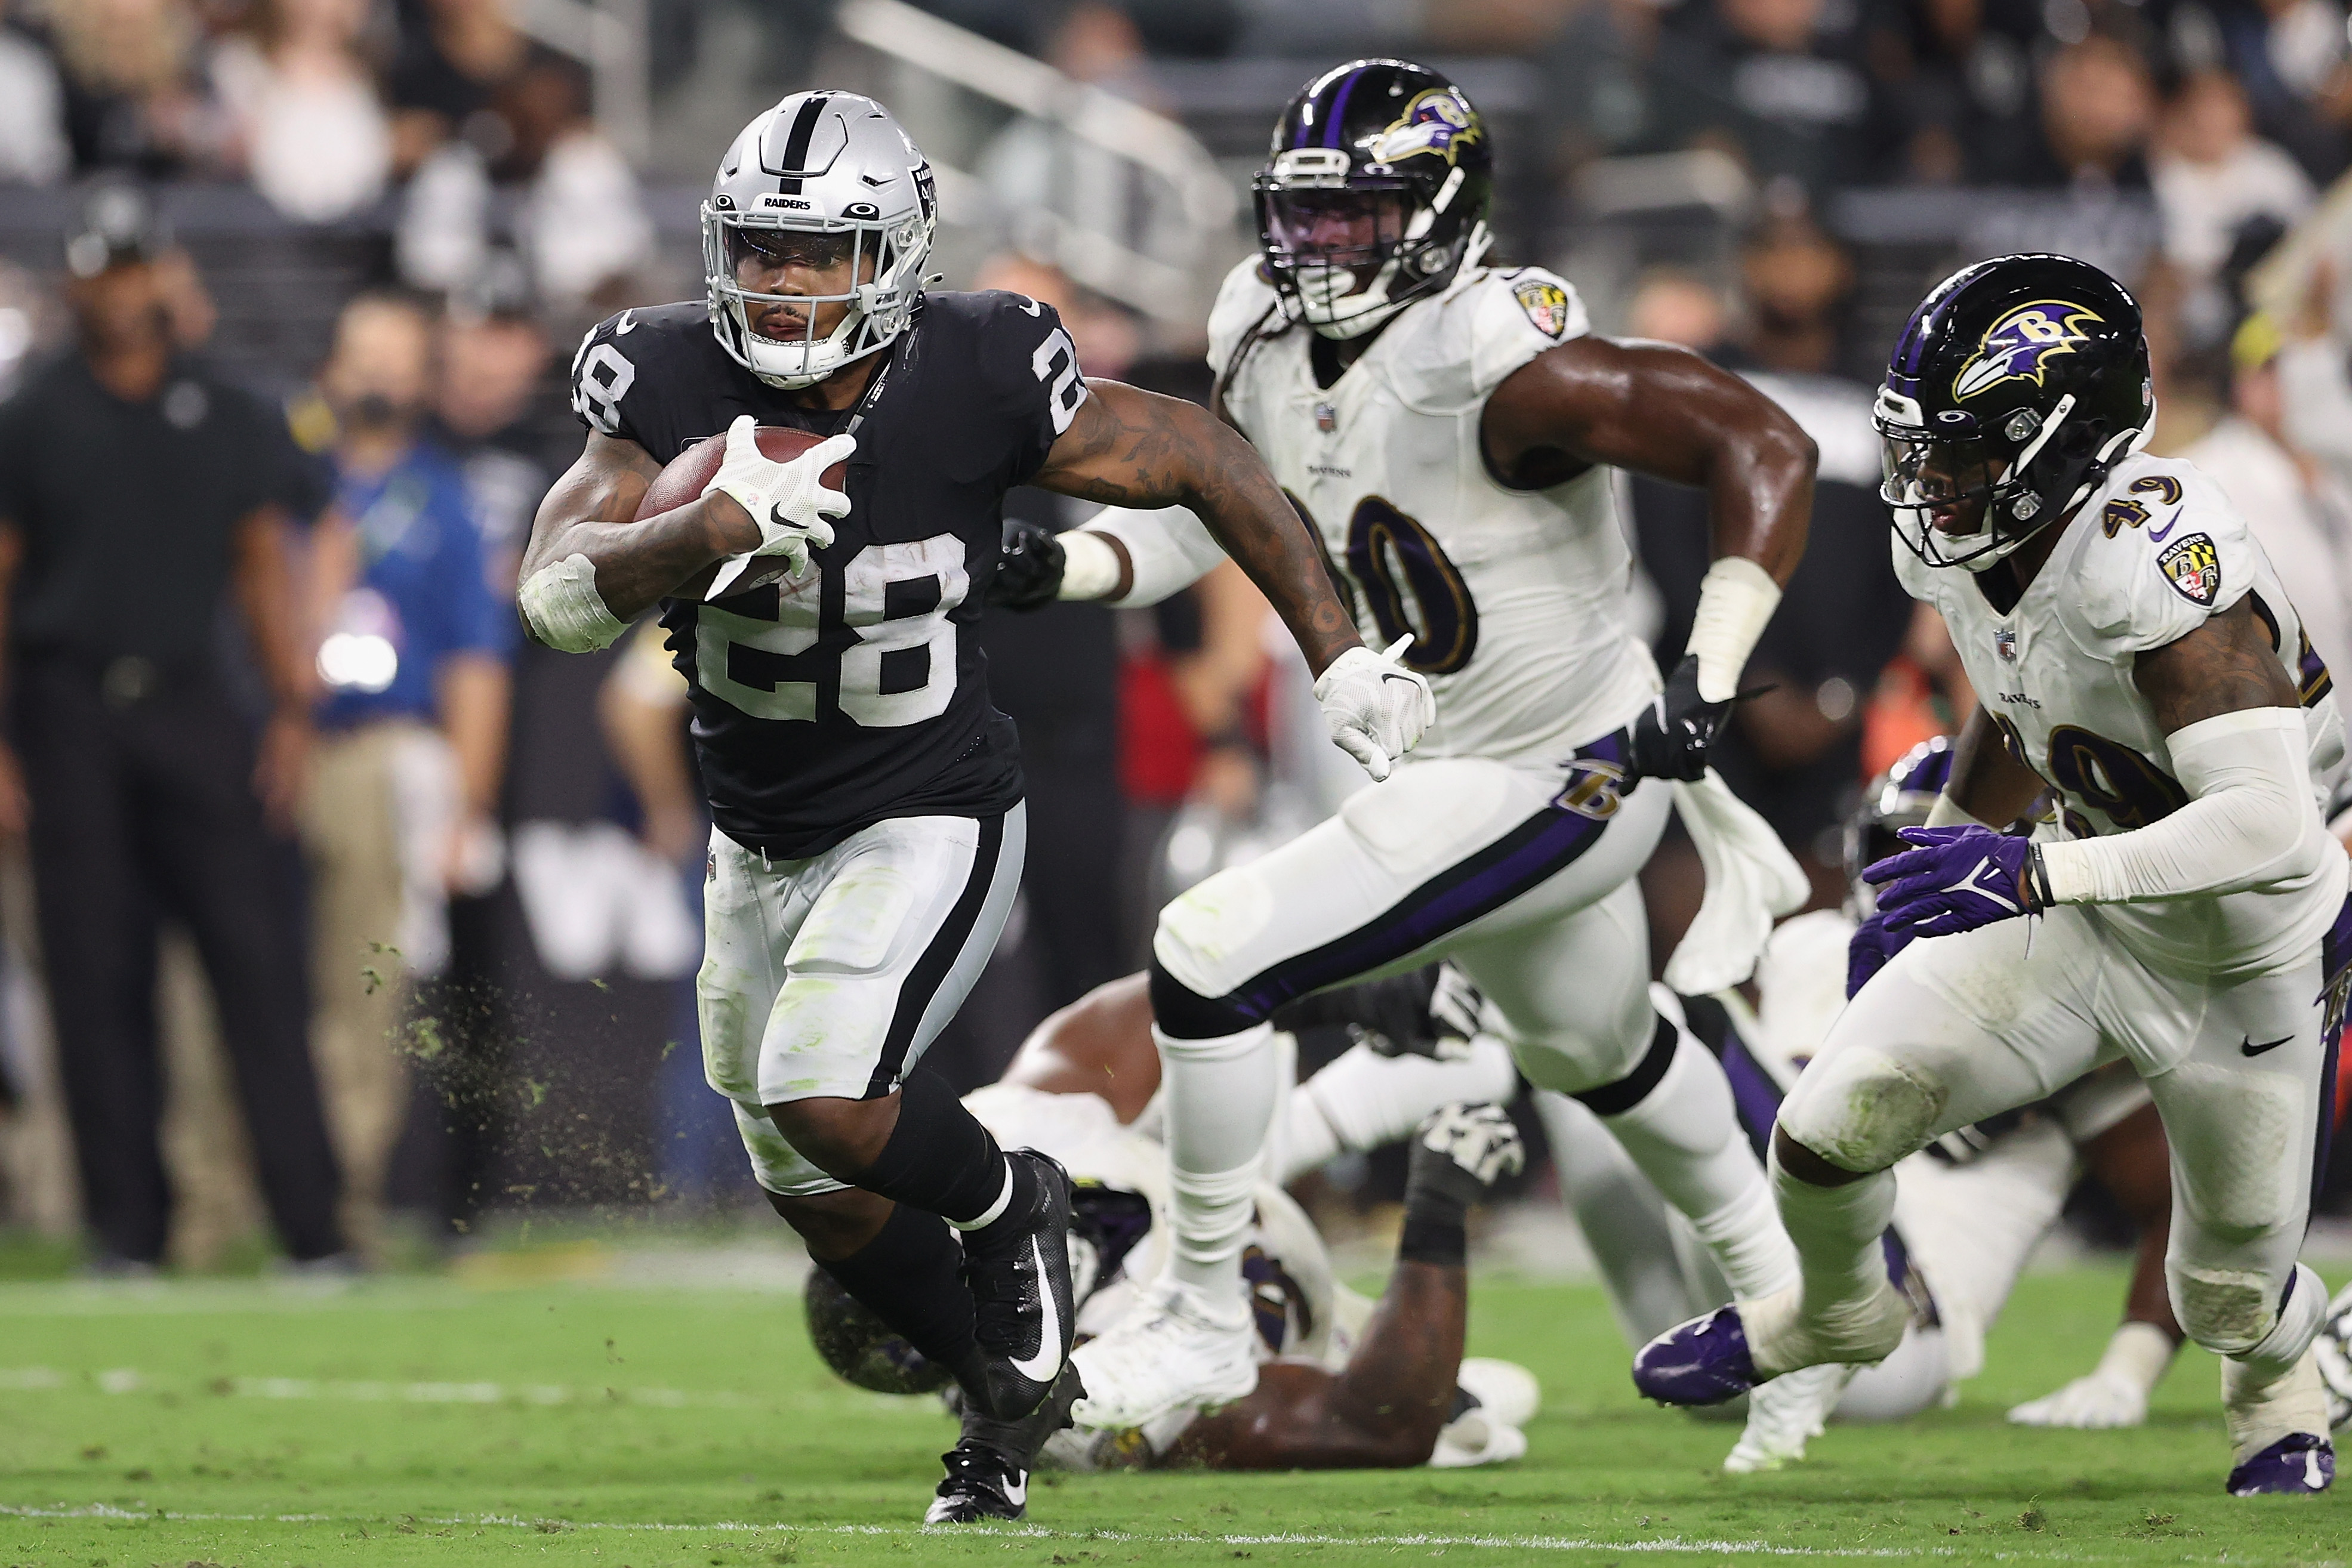 Raiders running back Josh Jacobs questionable for Chargers